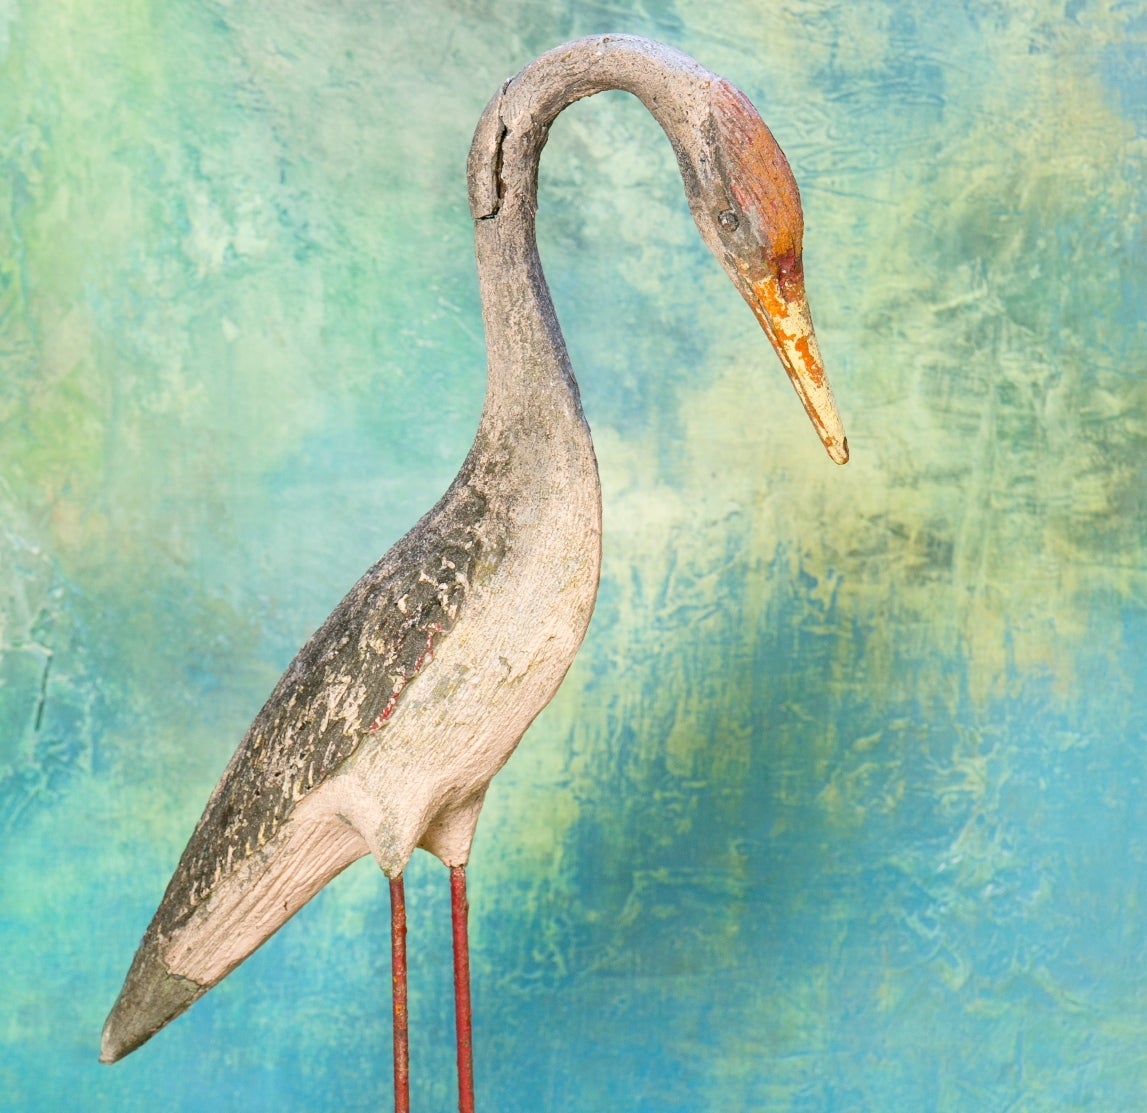 Cement sculpture of shorebird, most likely a heron. Body of the heron is reinforced concrete. Legs are made from iron. Hand-sculpted and hand painted. From France circa 1950's.  There is small damage to the neck.